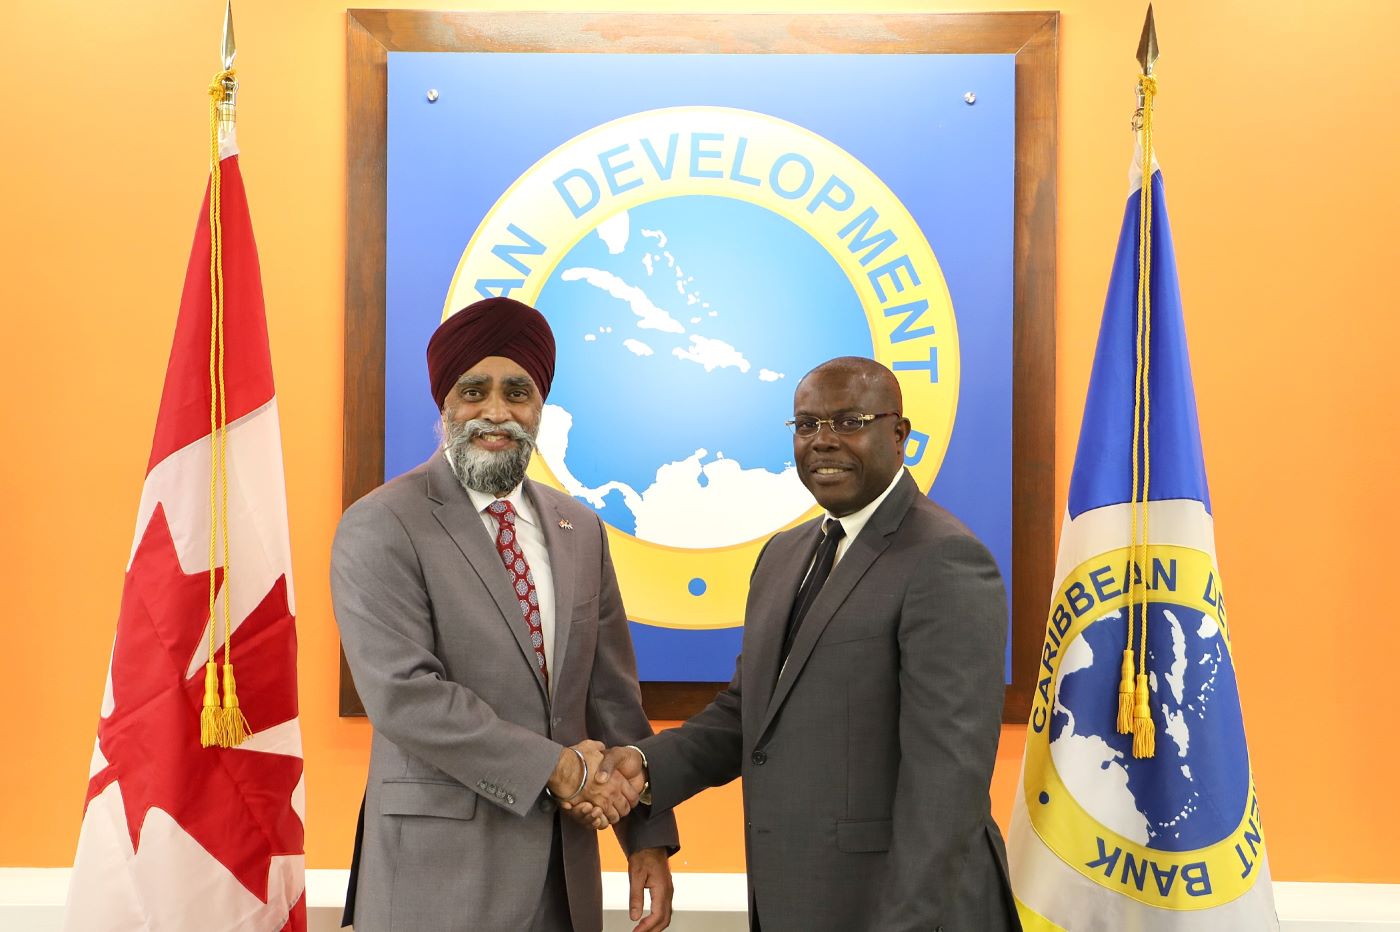 Minister Harjit Sajjan shaking hands with CDB Vice President Isaac Solomon in front of flags of Canada and CDB